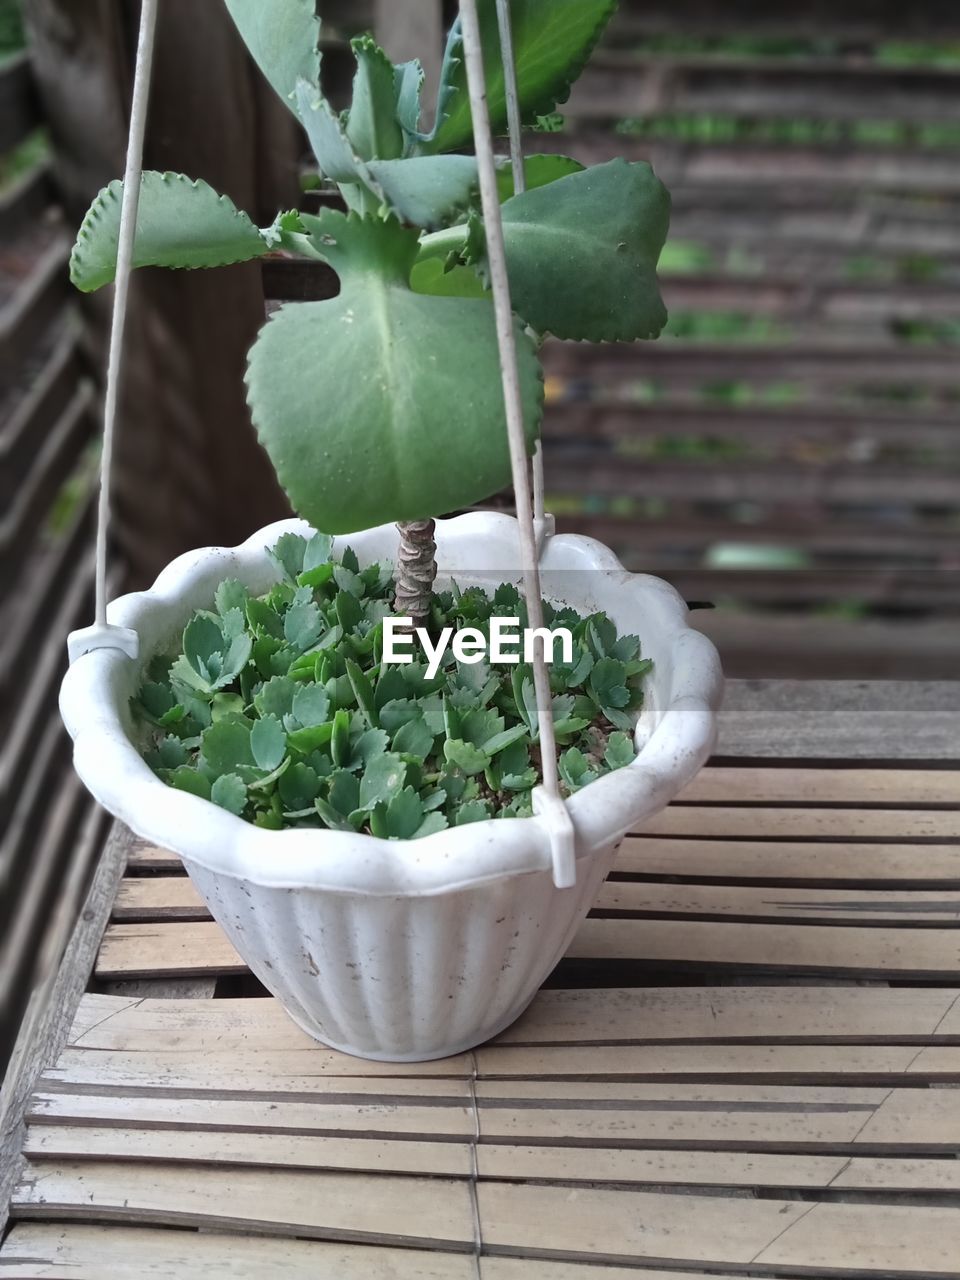 green, plant, leaf, flower, growth, plant part, wood, food and drink, food, produce, freshness, healthy eating, nature, wellbeing, no people, garden, vegetable, potted plant, day, outdoors, close-up, container